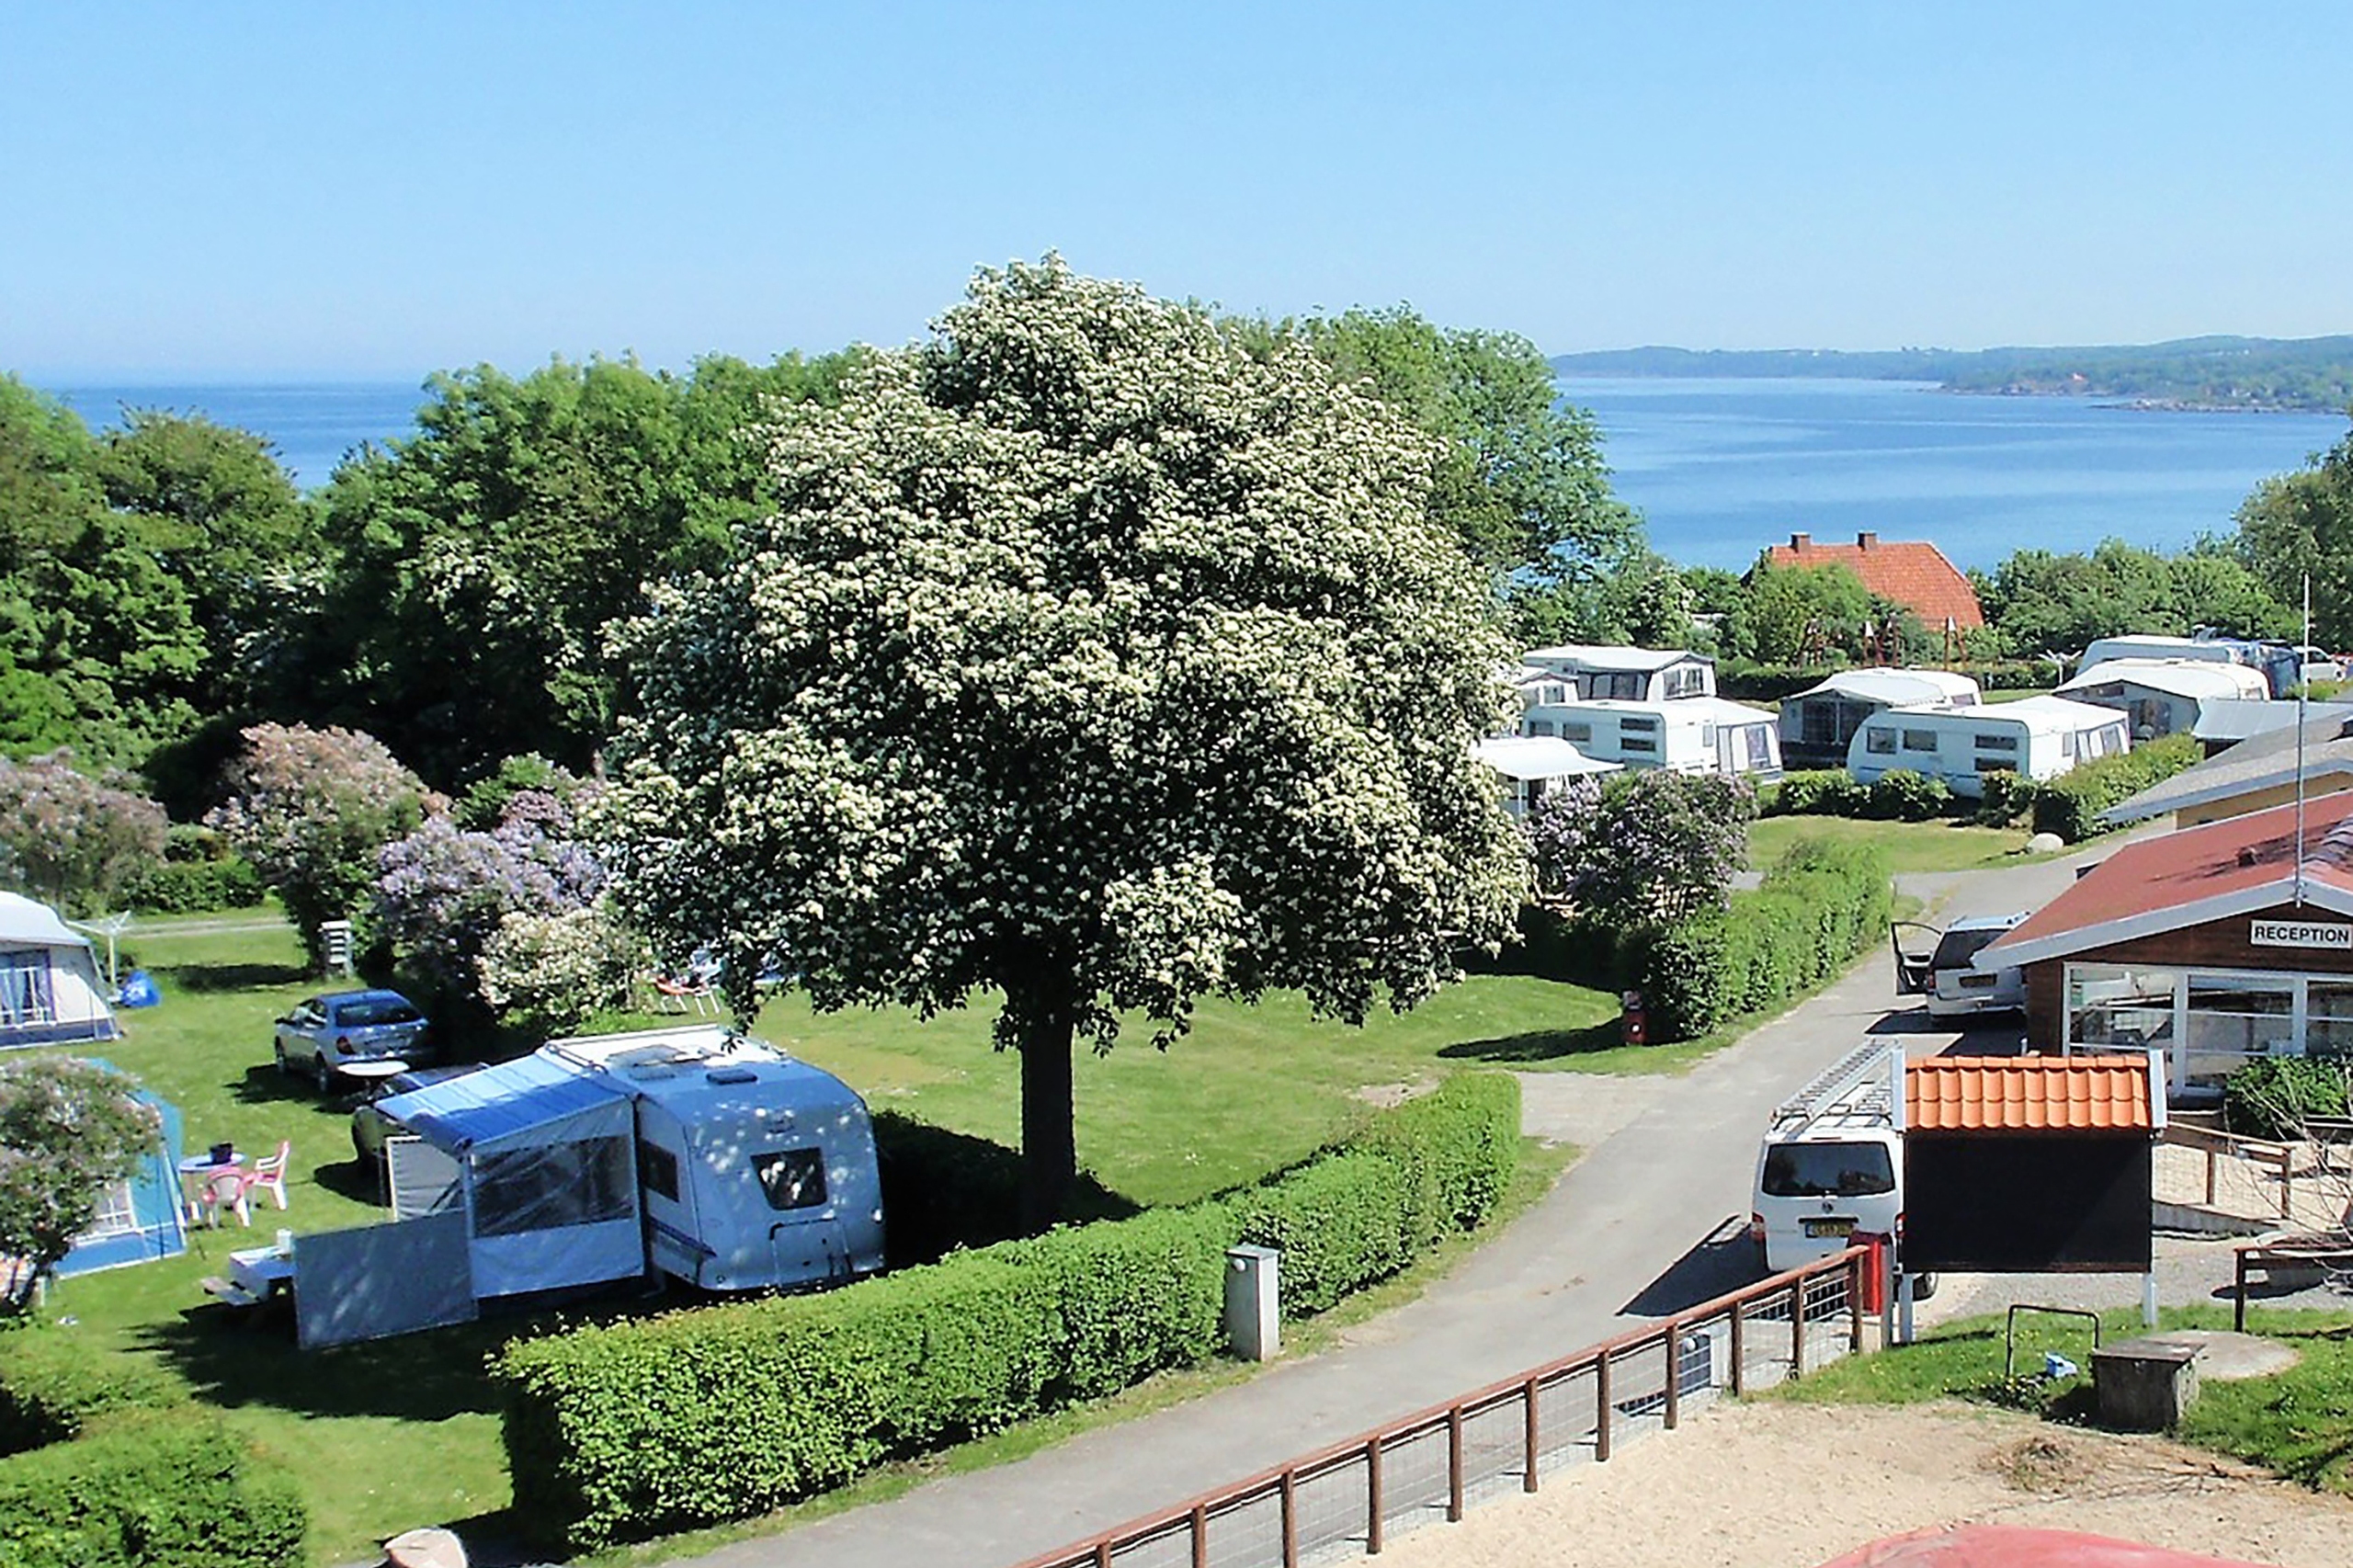 In the fishing village of Allinge there is a particularly beautiful campsite with a fantastic view of the sea.